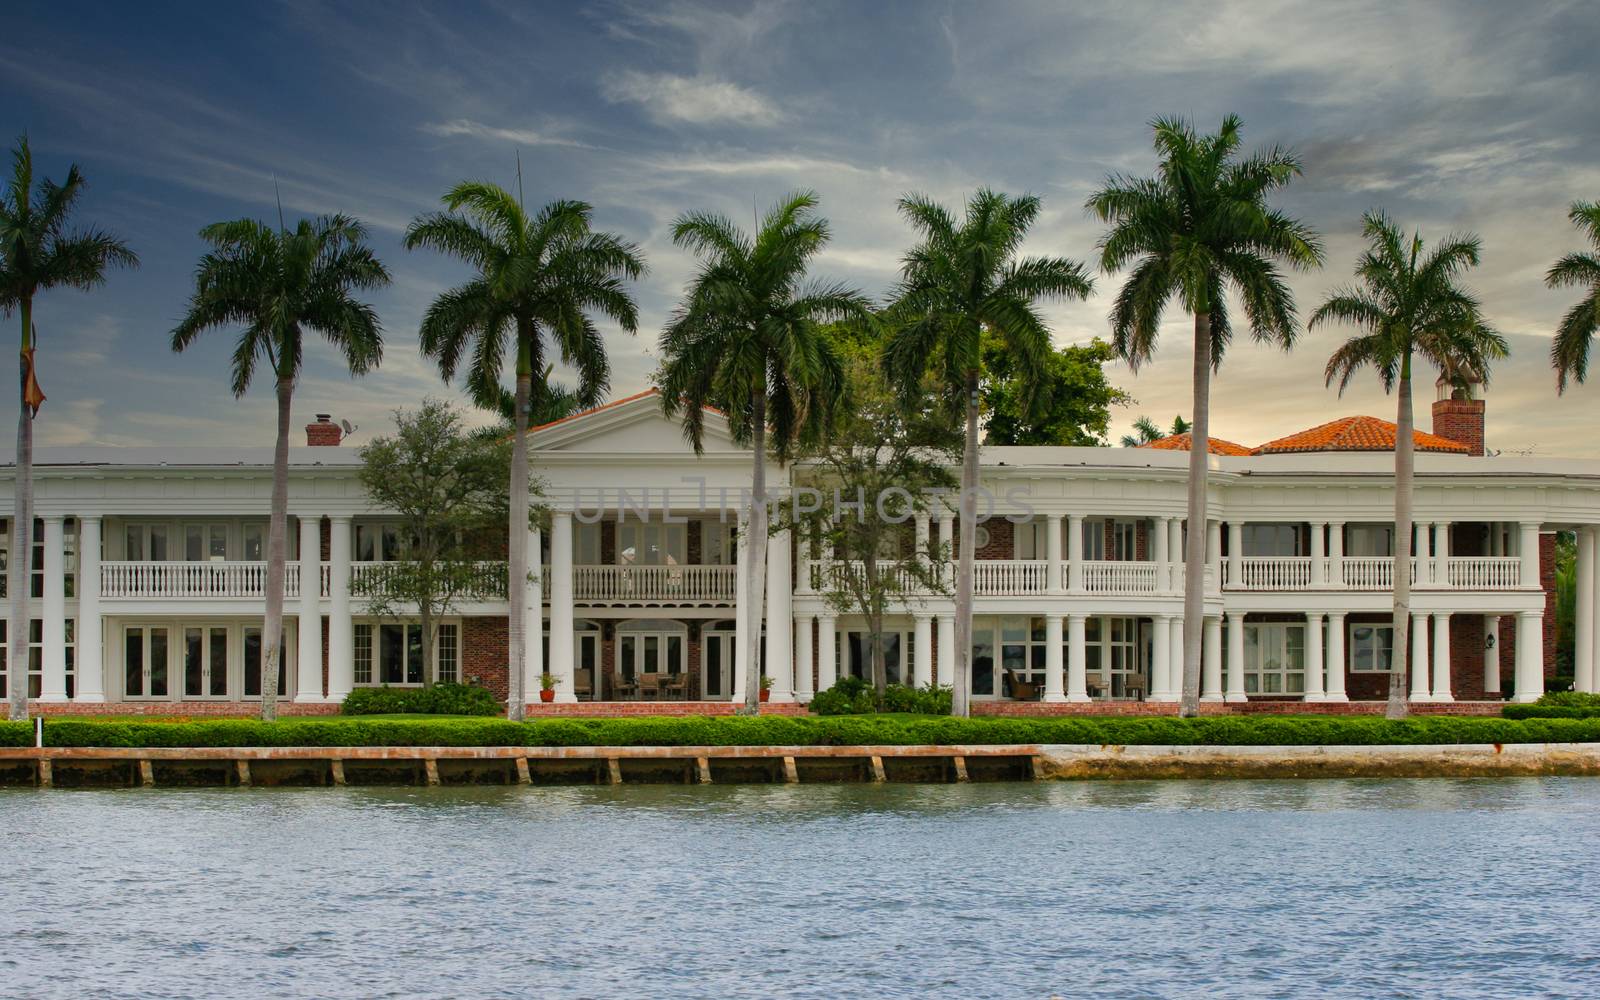 A coastal mansion lined with palm trees